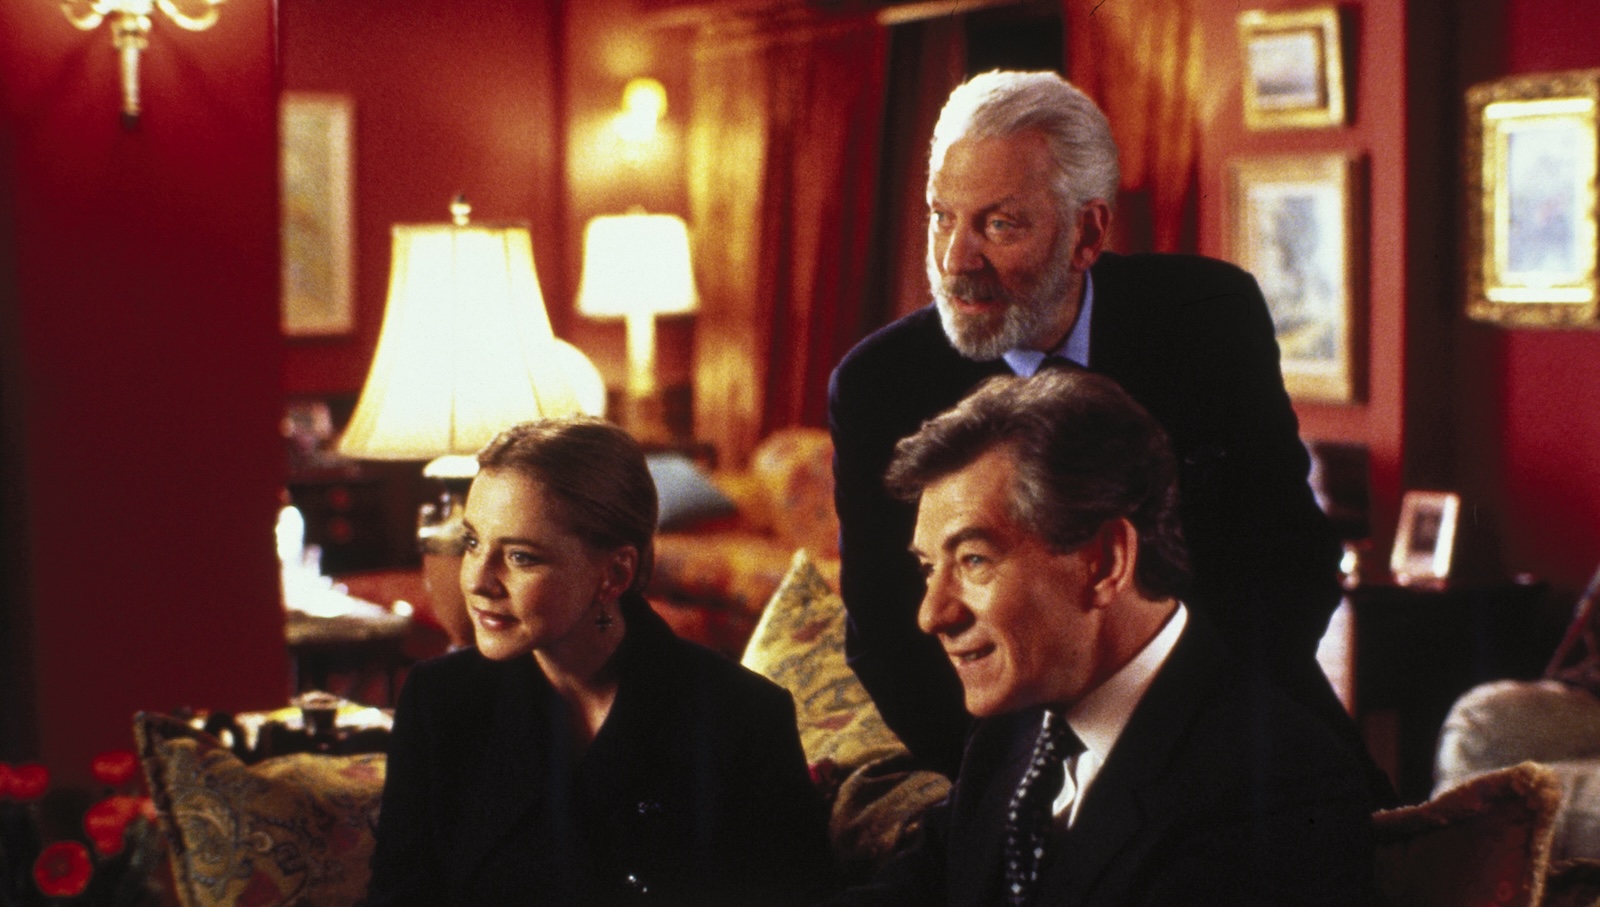 Three people, two men and a woman, lean forward expectantly, on a couch as they look at someone off screen.